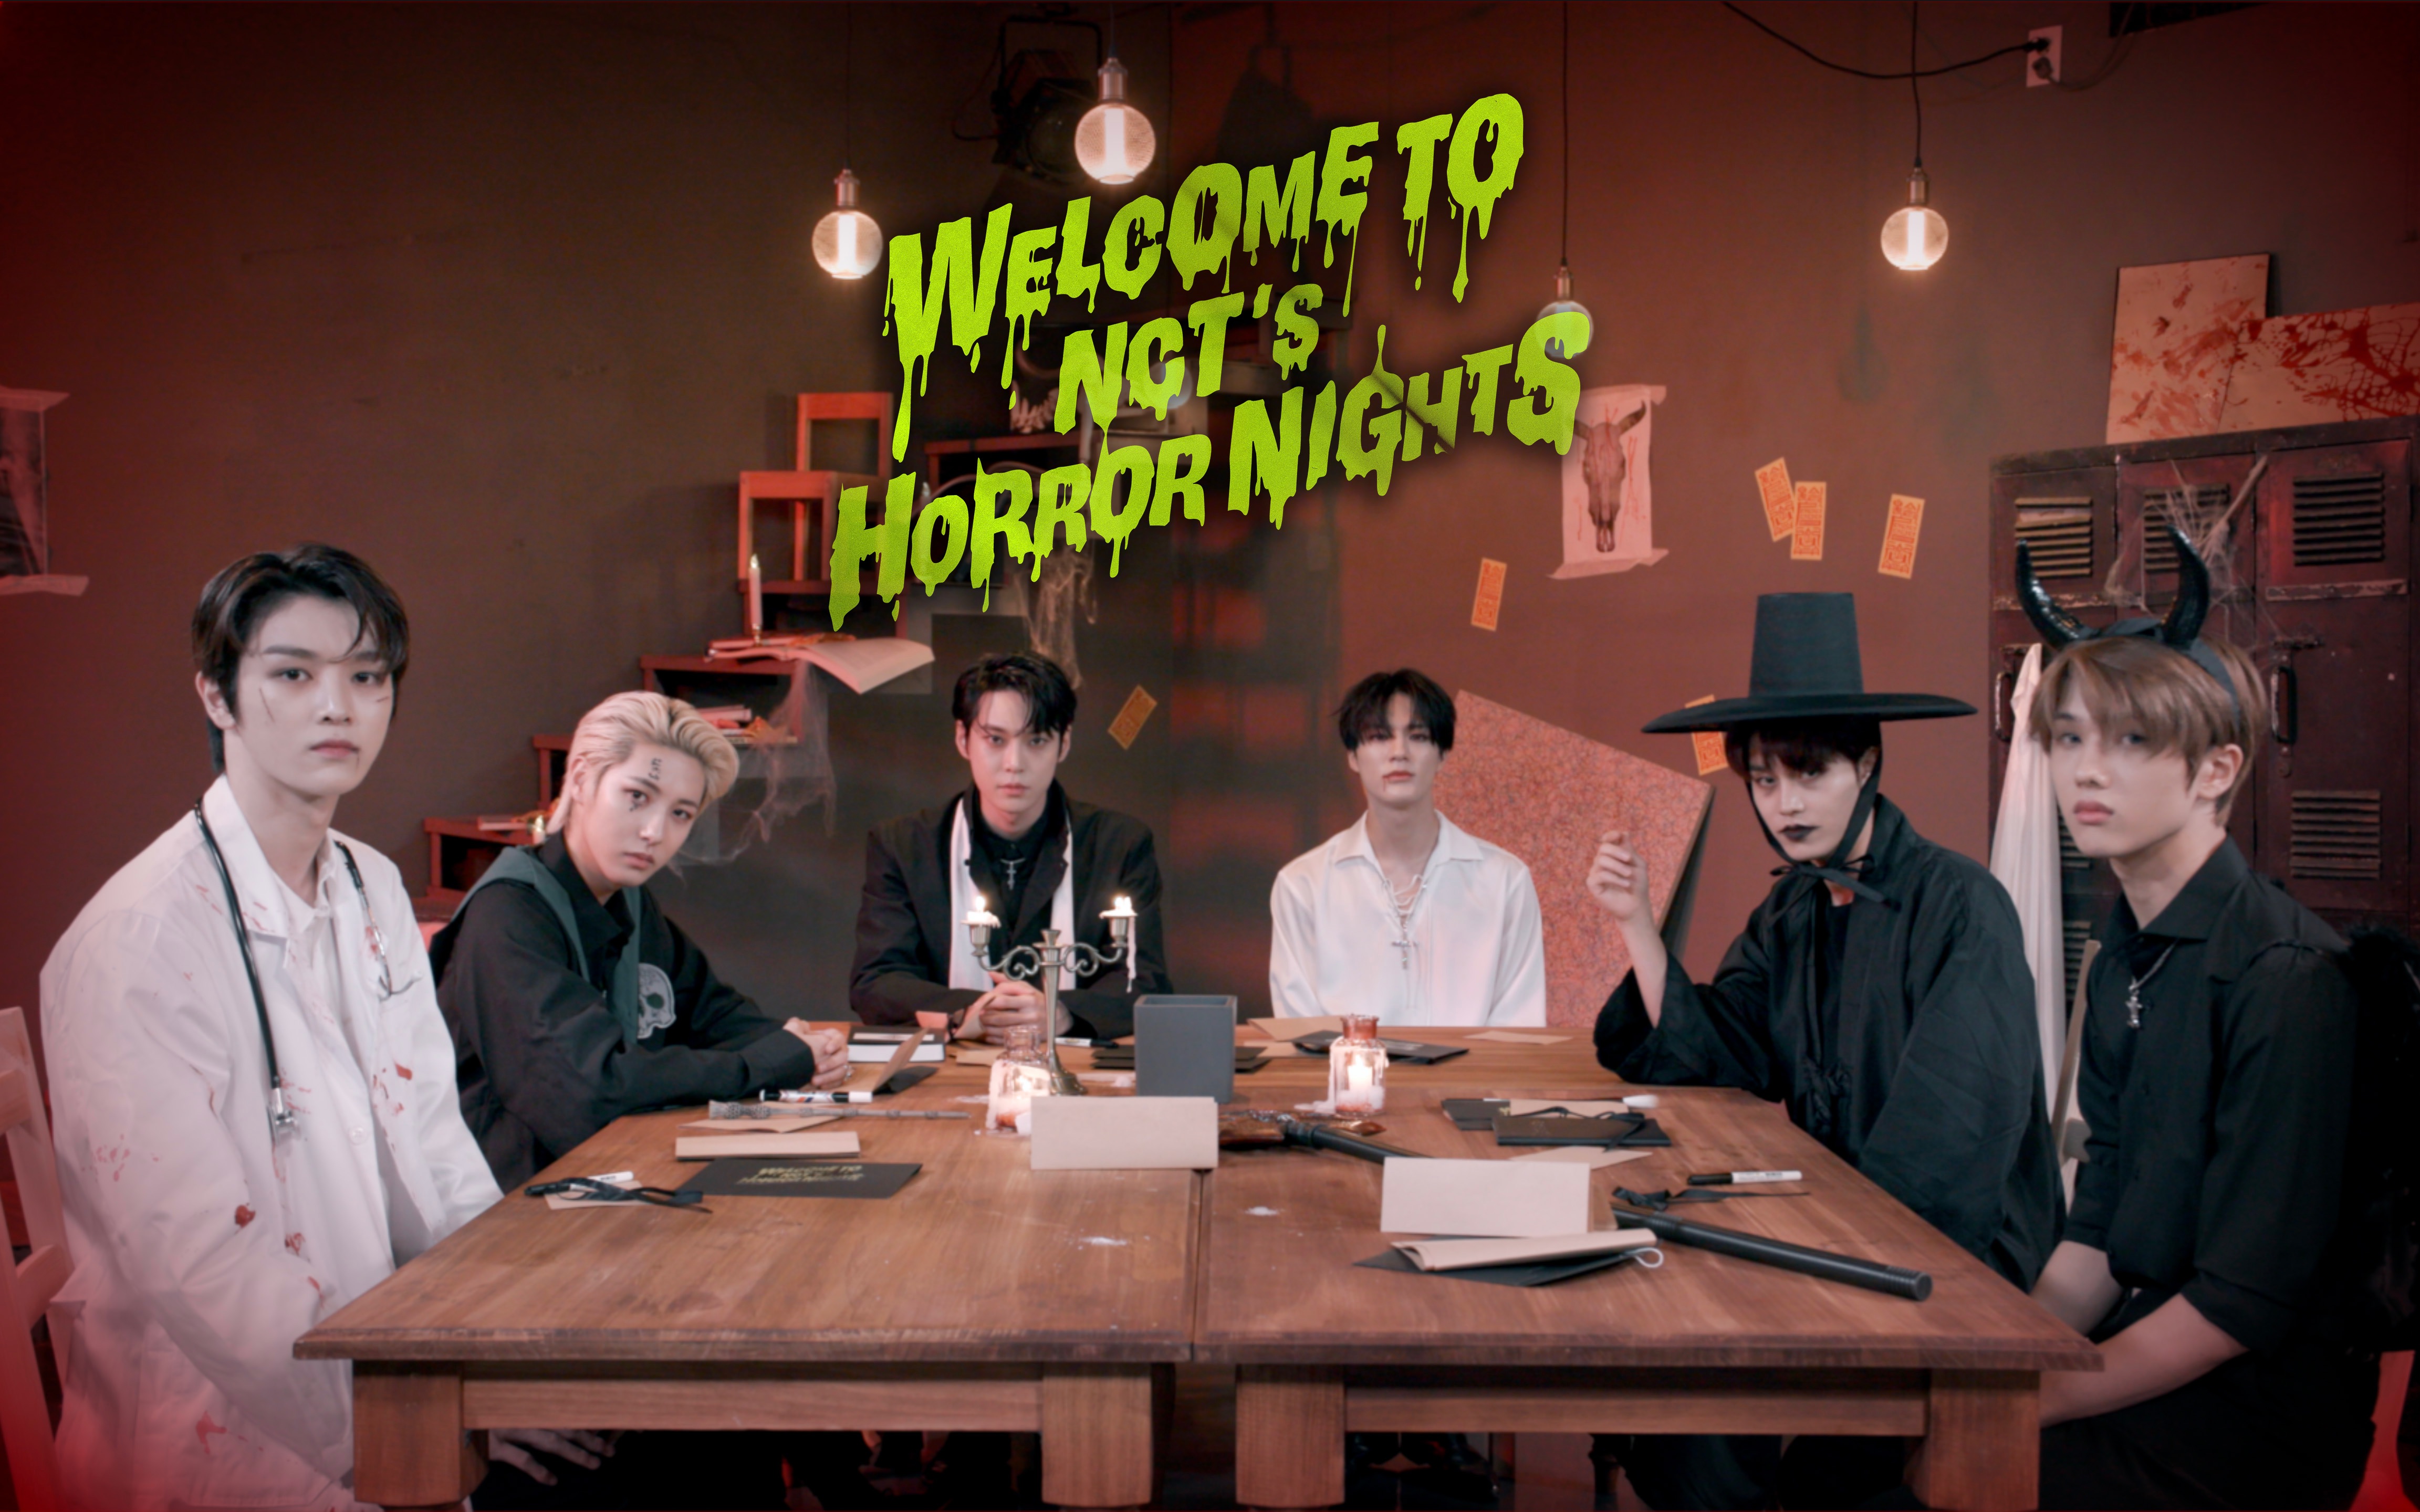 【NCT】🩸欢迎来到怪谈会🩸: 第一篇故事 | WELCOME TO NCT’S HORROR NIGHTS